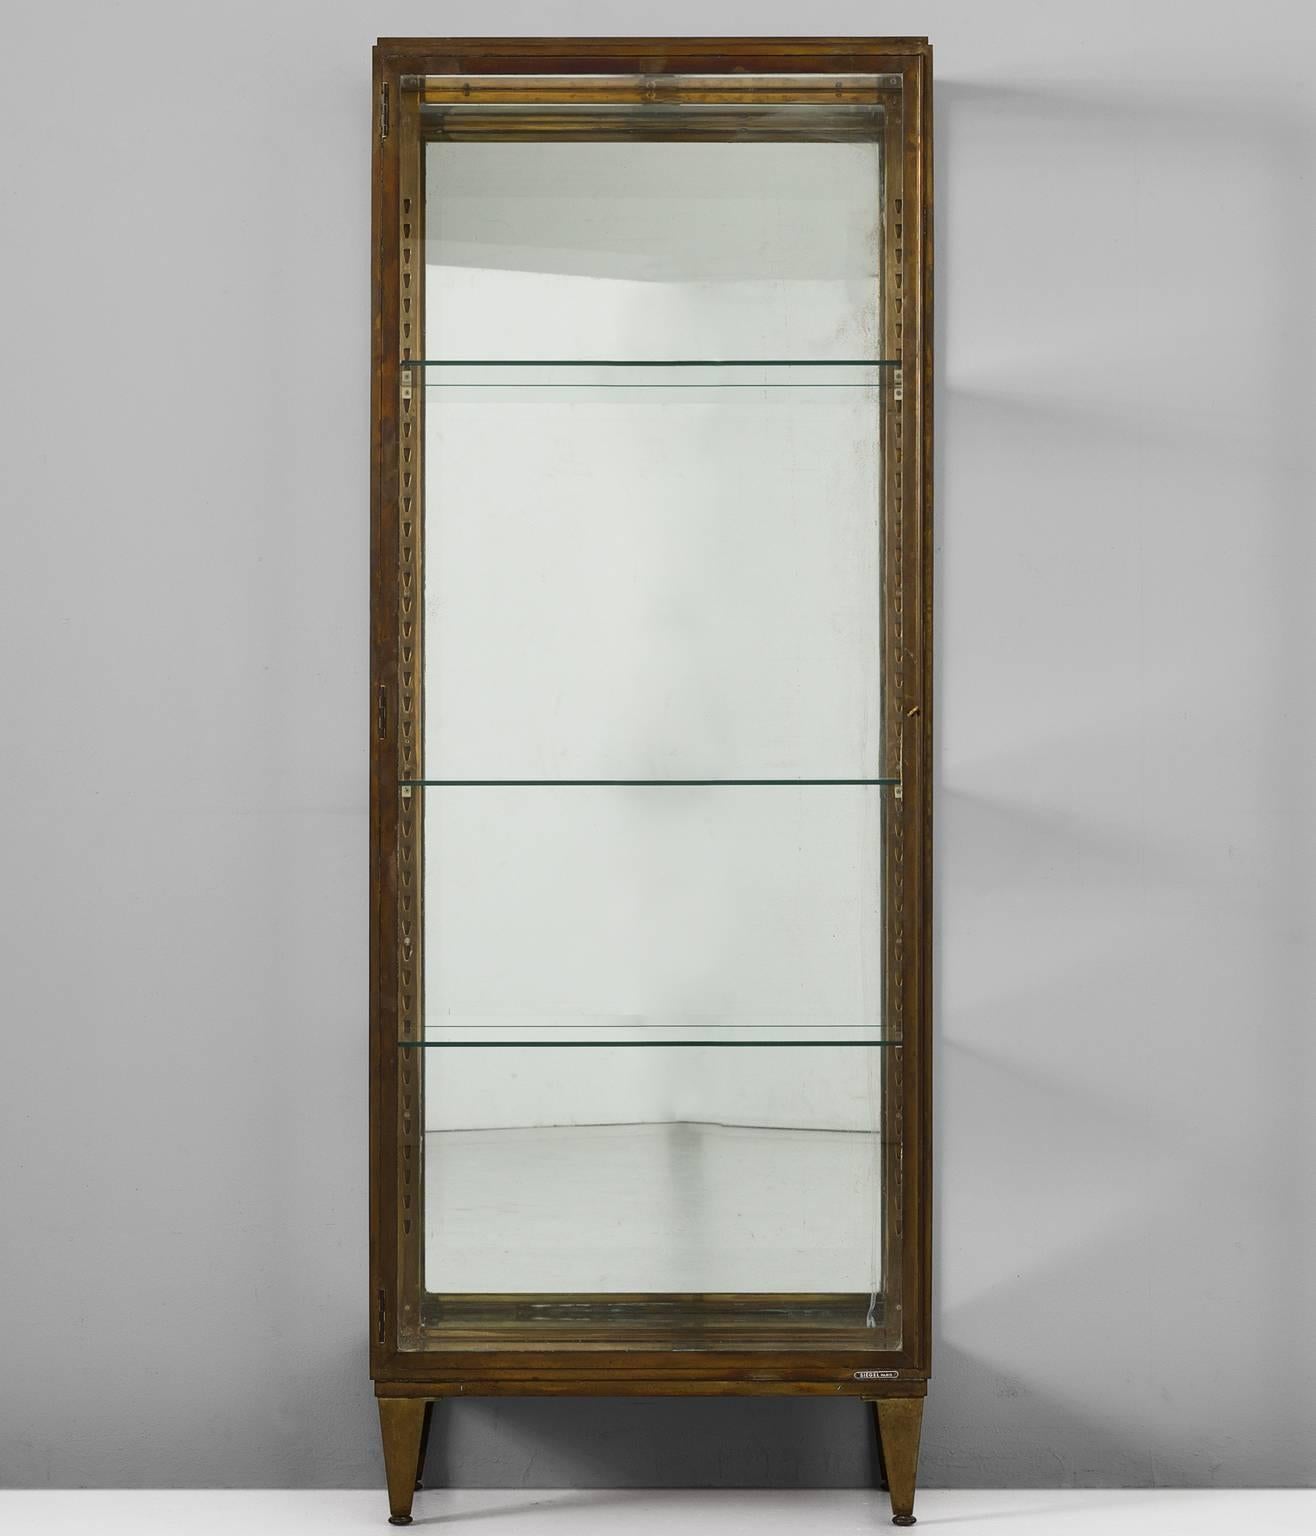 Vitrine, in brass and glass, by Siegel, France, 1930s. 

Elegant art-deco vitrine in patinated brass, made by Siegel Paris. This company is known for it's high-quality boutique furniture for the French market. This showcase is equipped with three